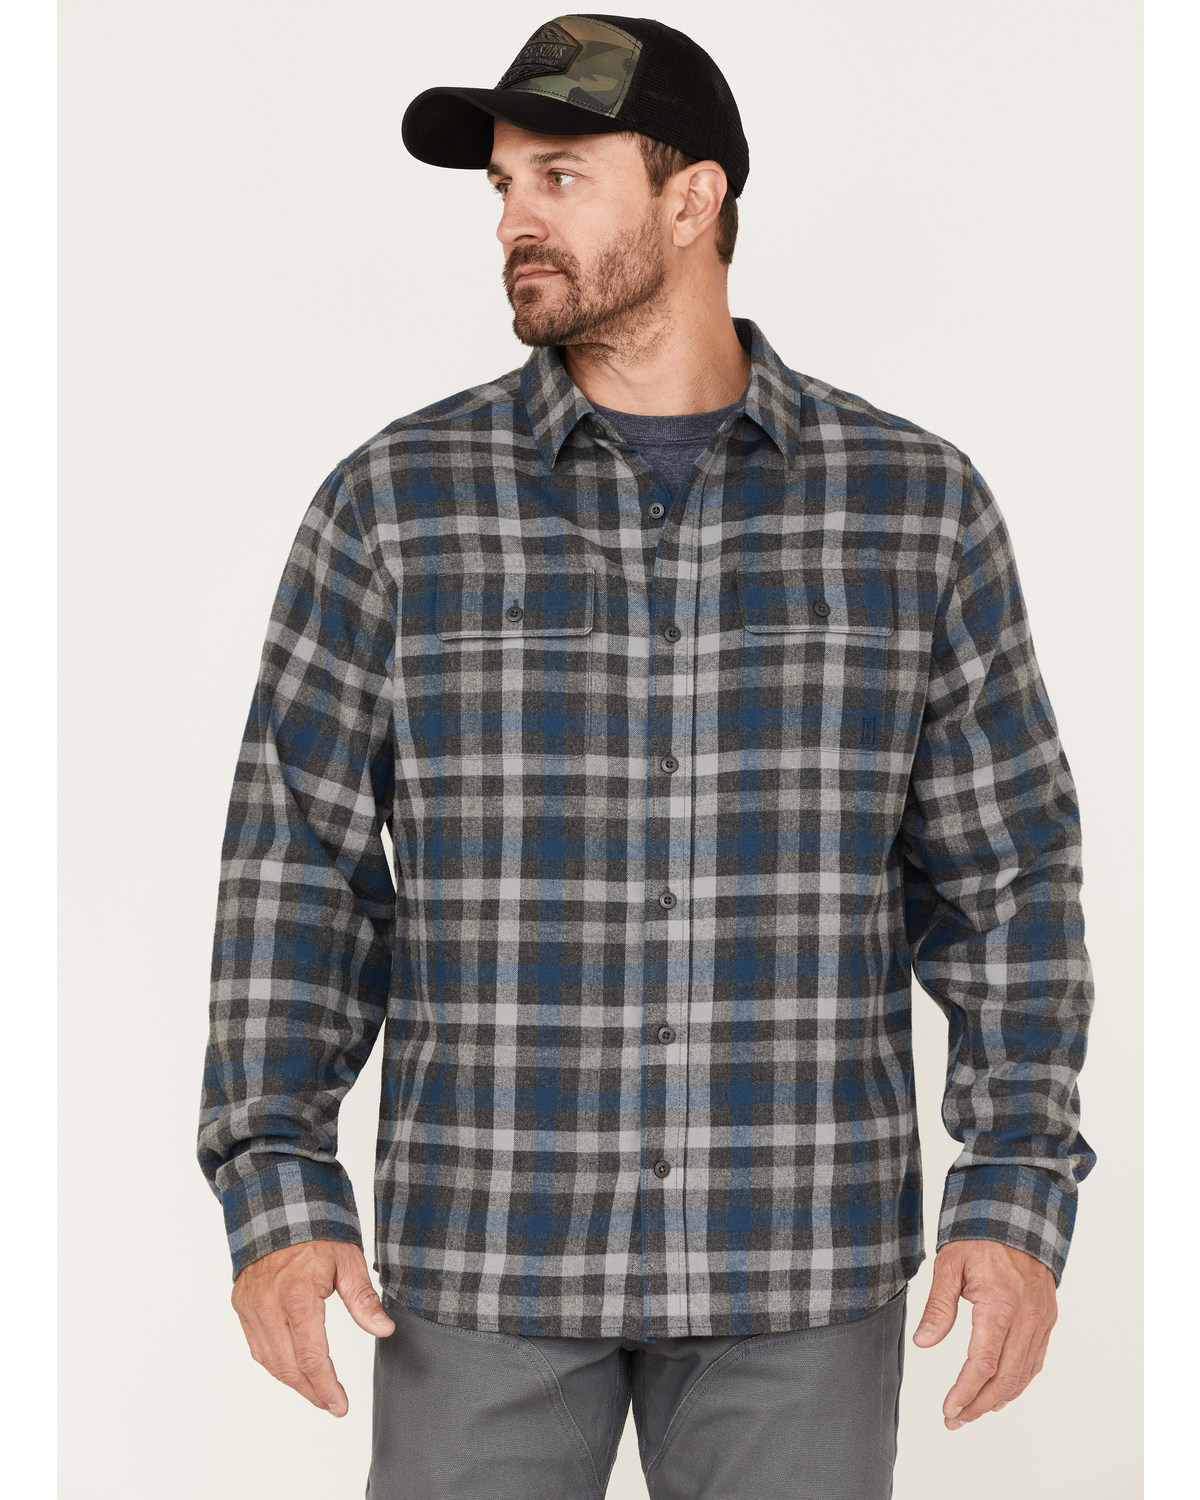 Brothers and Sons Men's Everyday Plaid Print Button Down Western Flannel Shirt